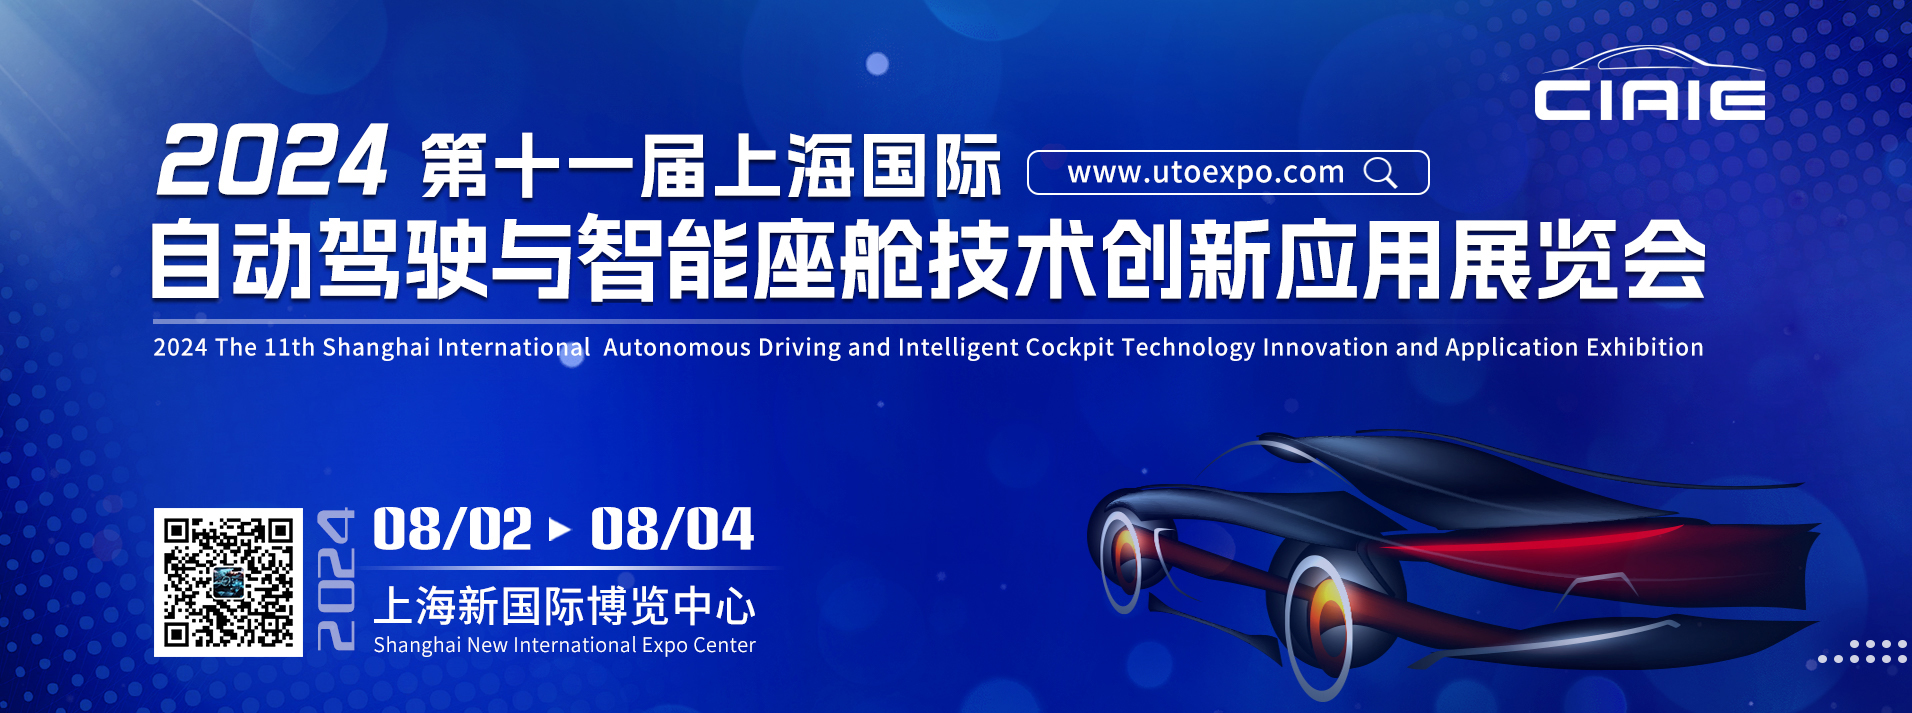 2024 The 11th Shanghai International  Autonomous Driving and Intelligent Cockpit Technology Innovation and Application Exhibition